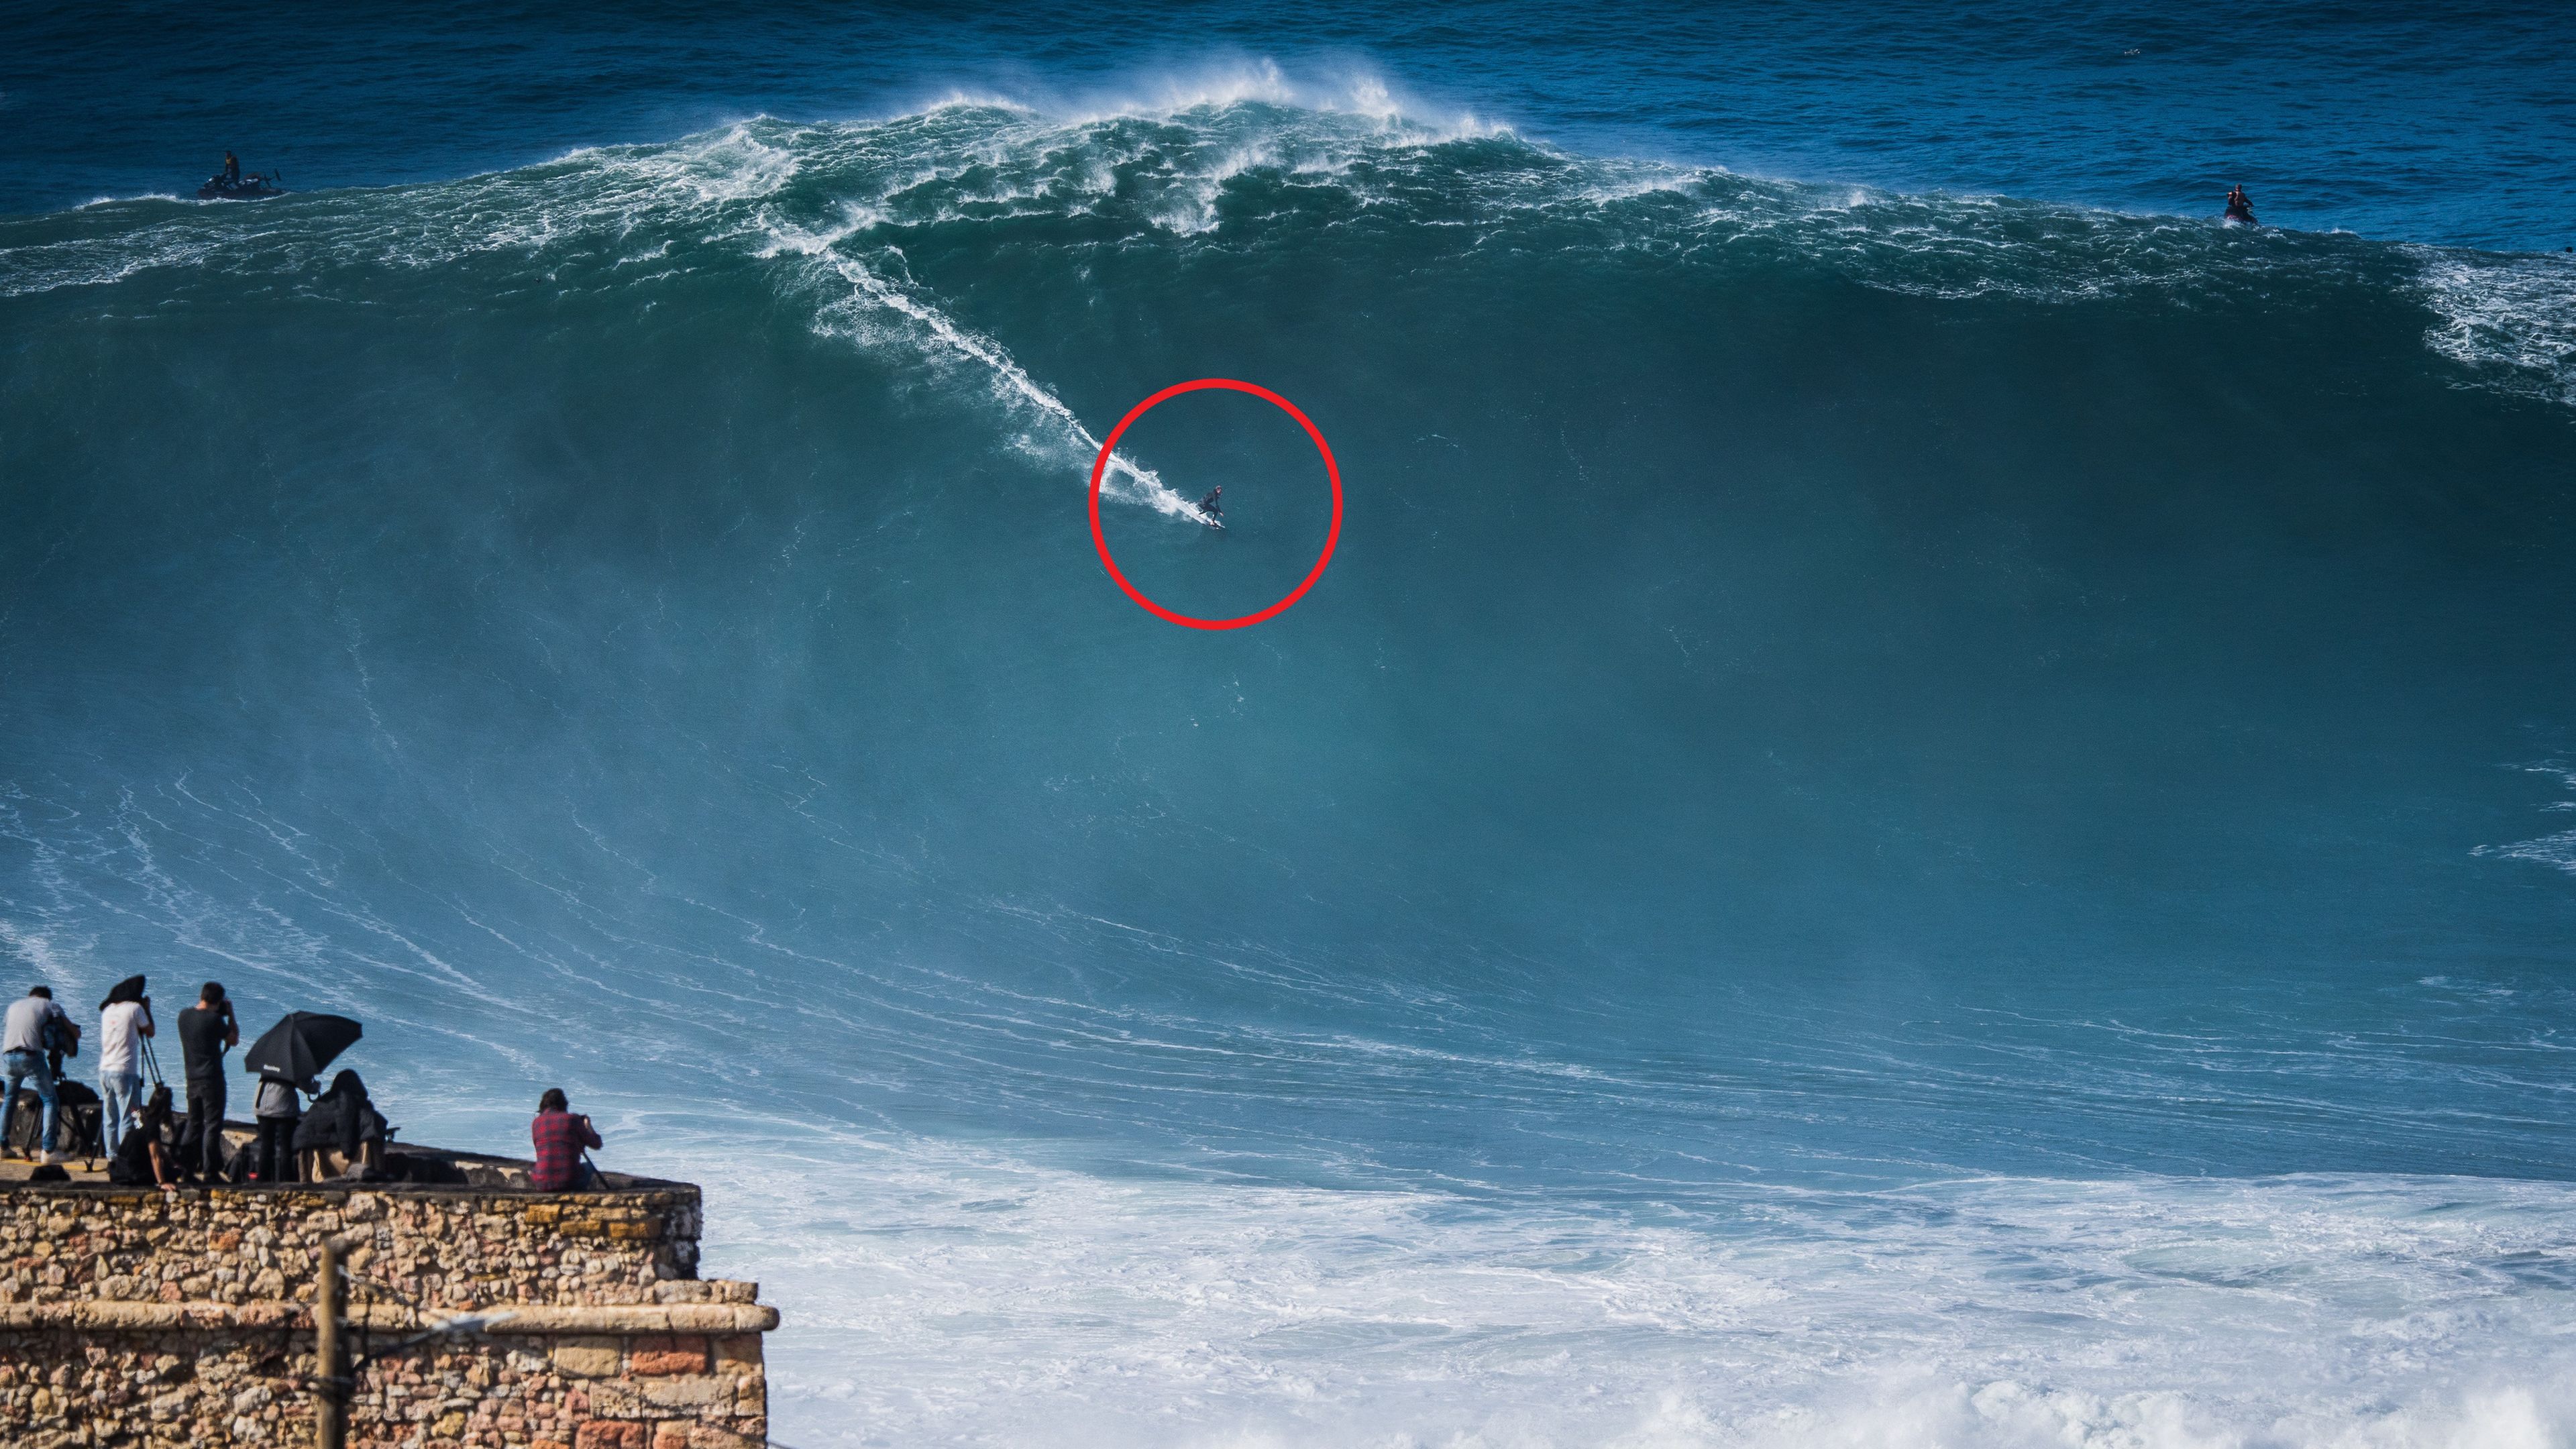 The whacky way experts judged this to be the biggest wave ever surfed